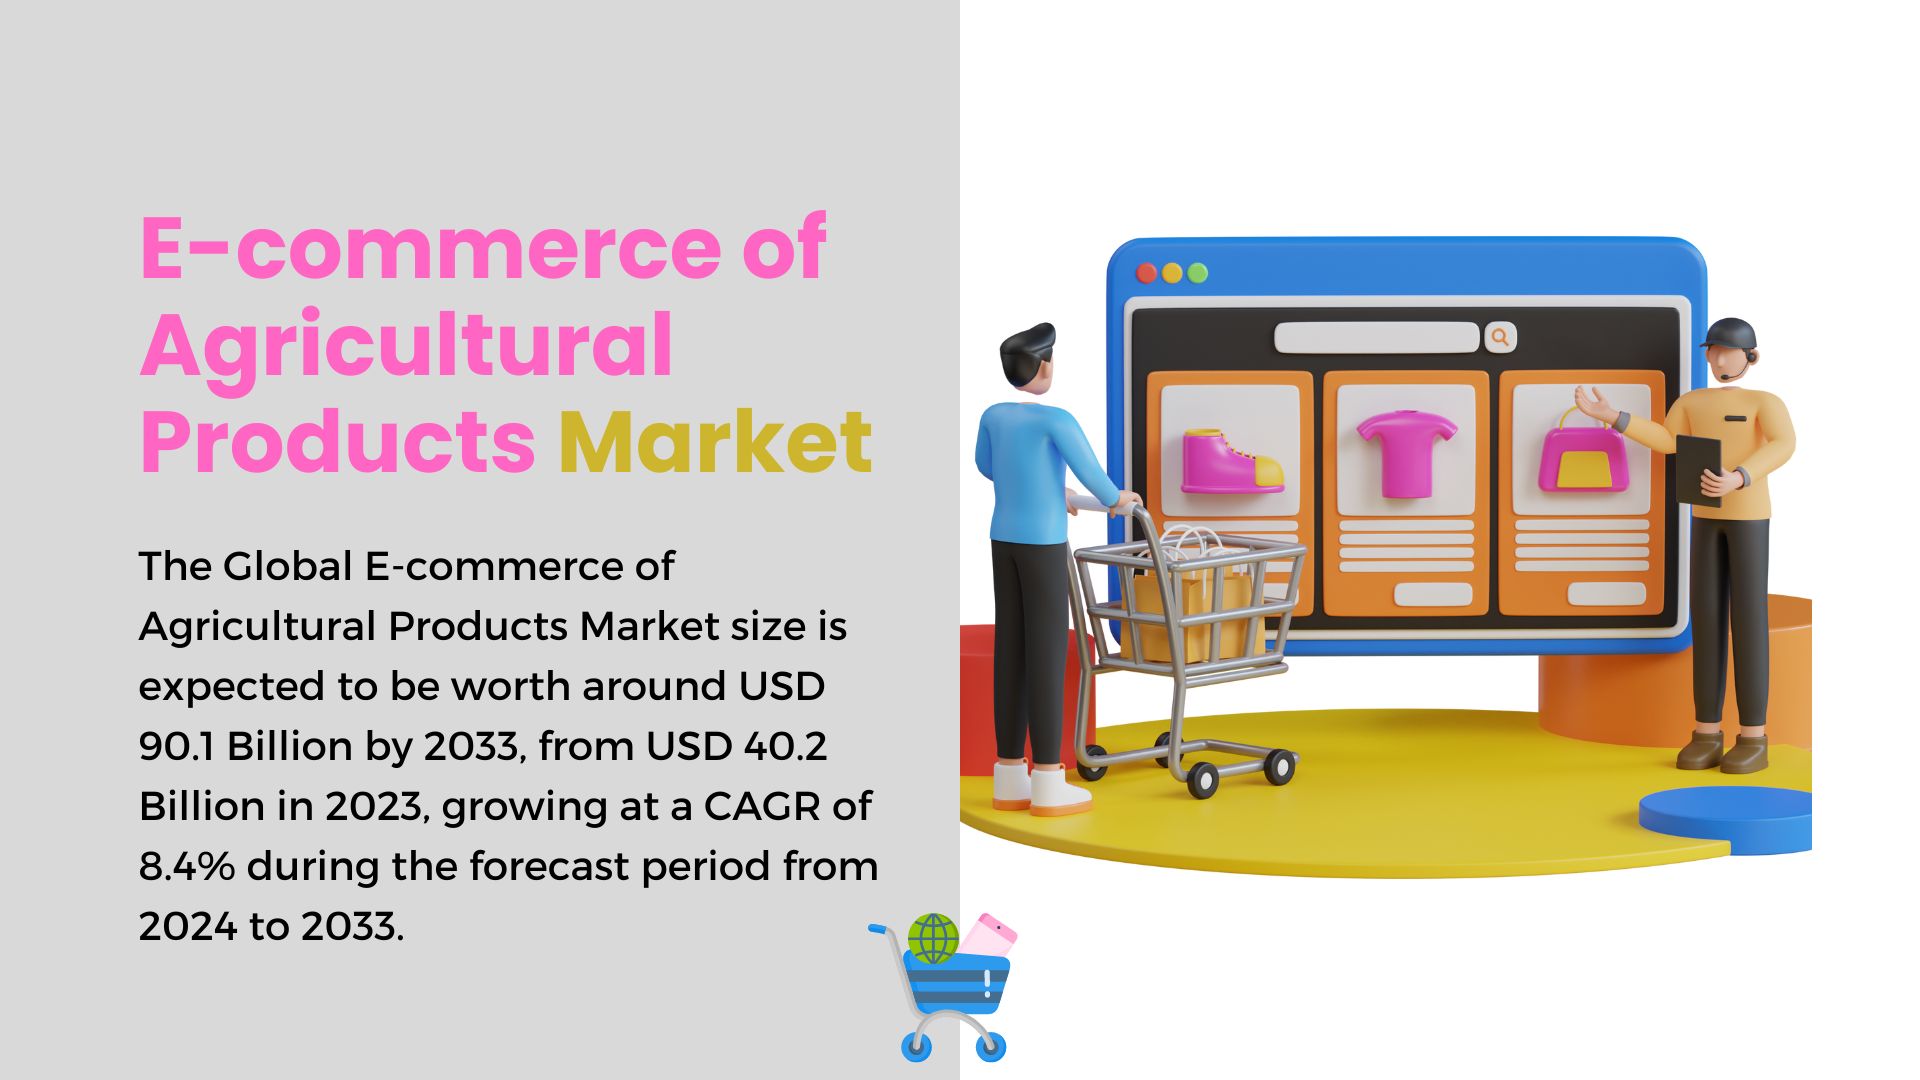 E-commerce of Agricultural Products Market to Hit USD 90.1 Bn by 2033